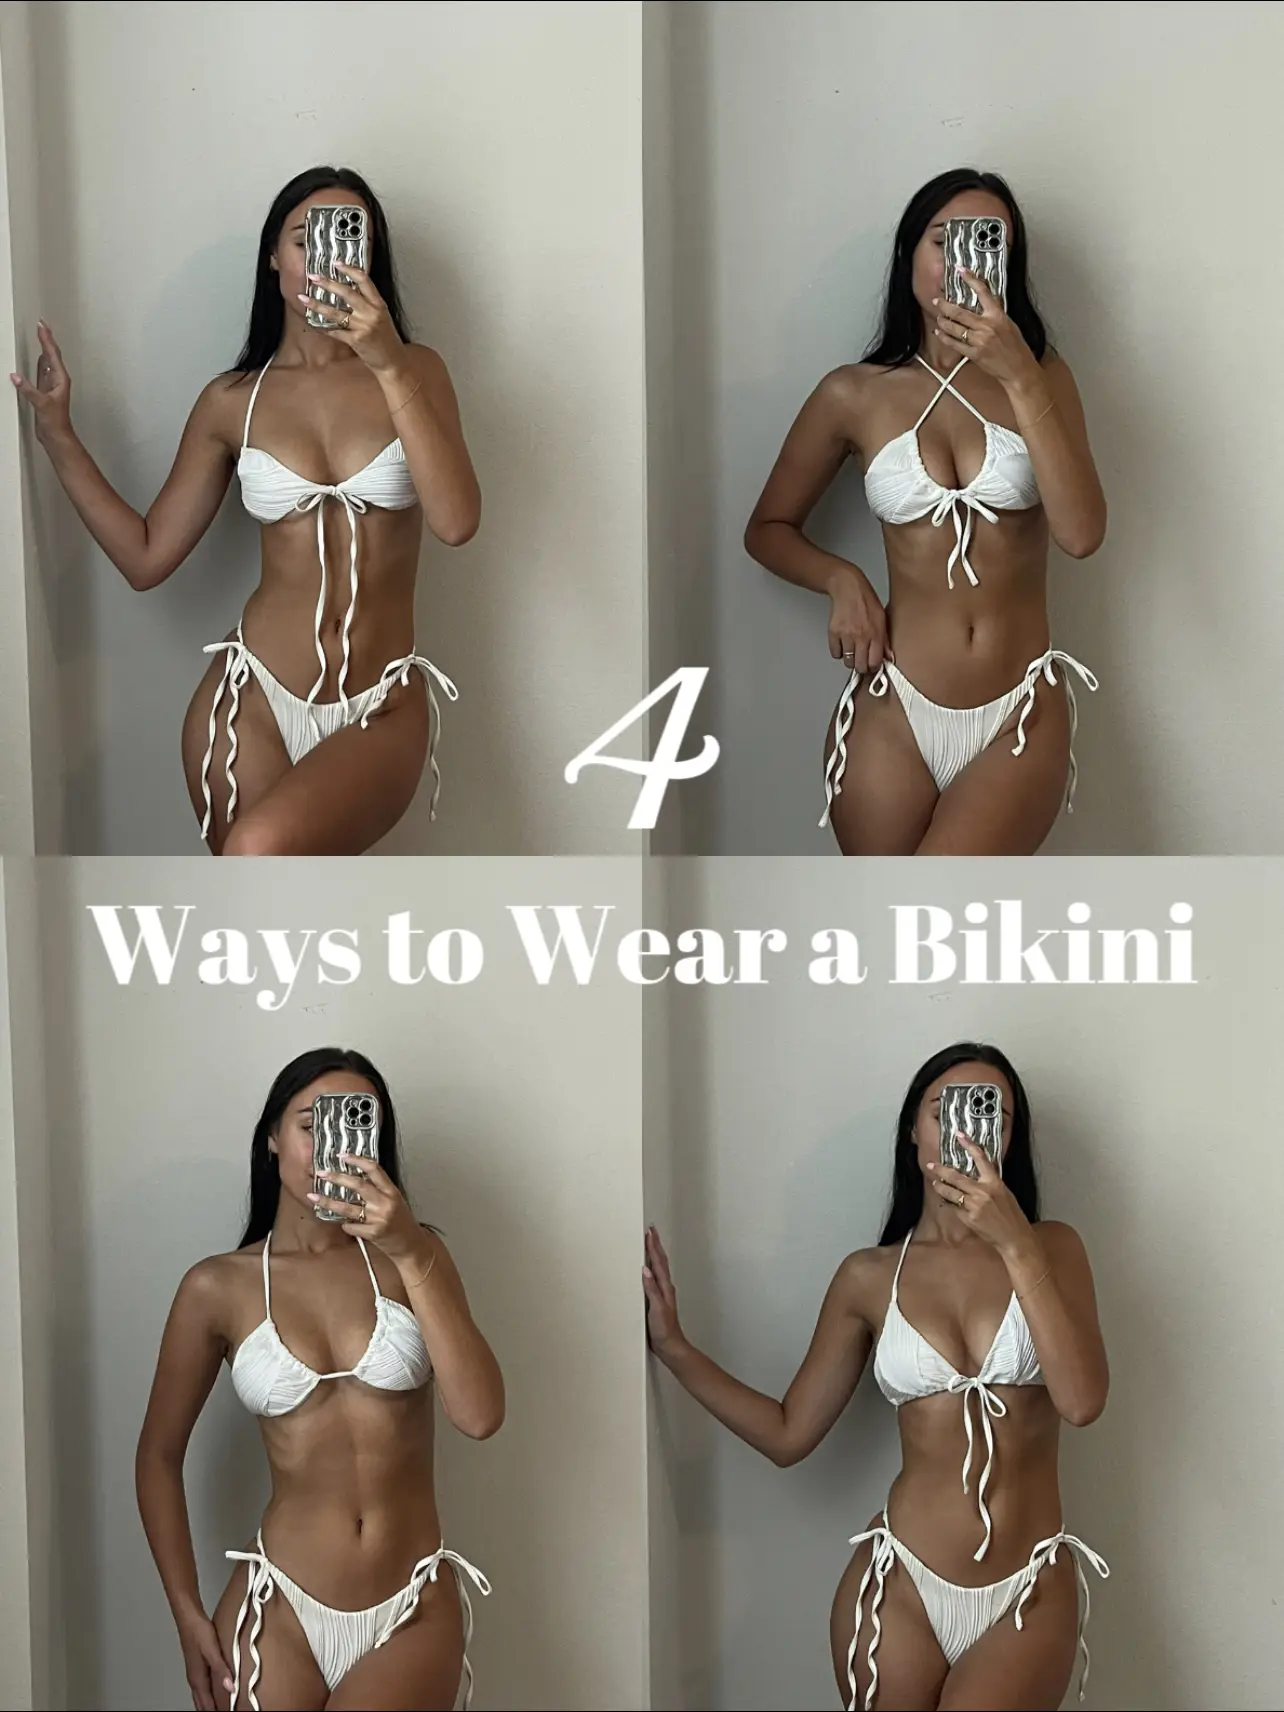 How to Store Your Swimsuits